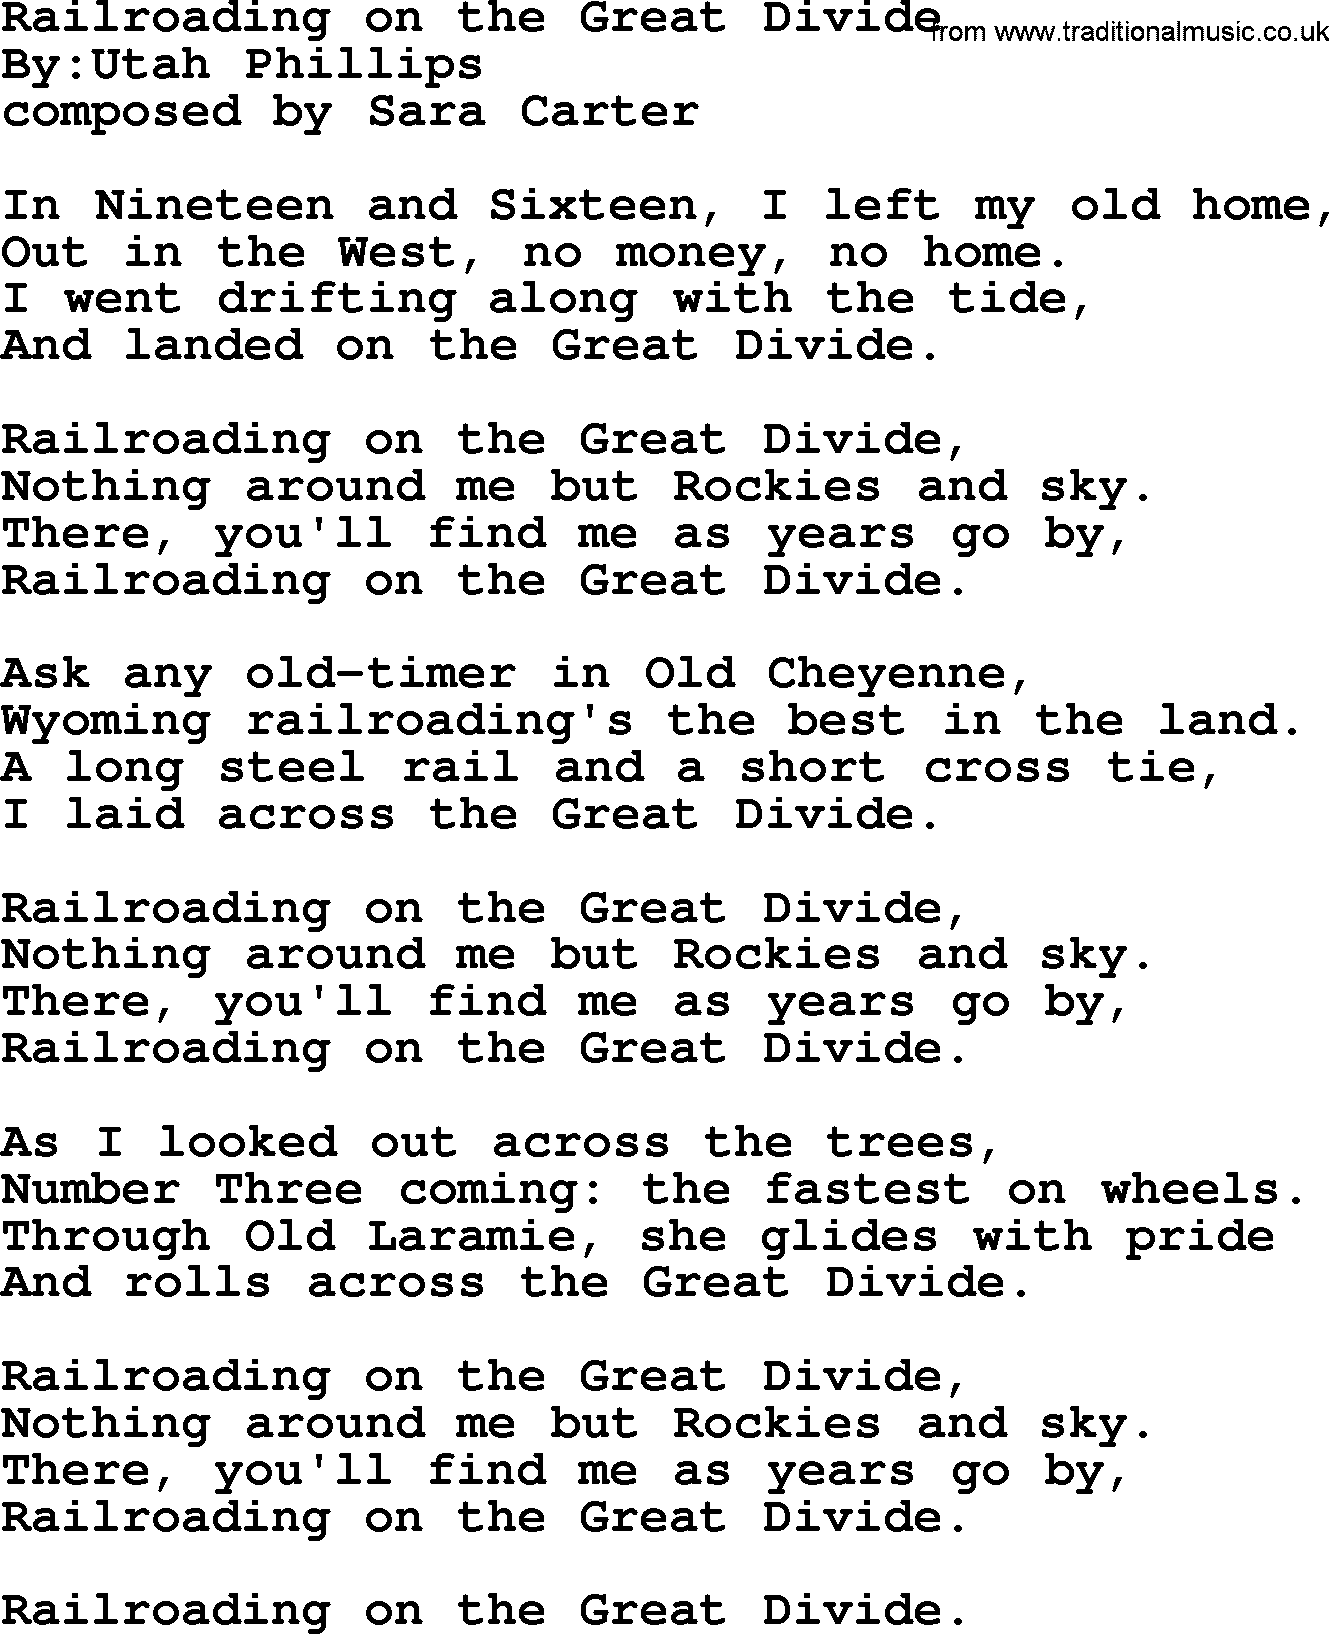 Political, Solidarity, Workers or Union song: Railroading On The Great Divide, lyrics